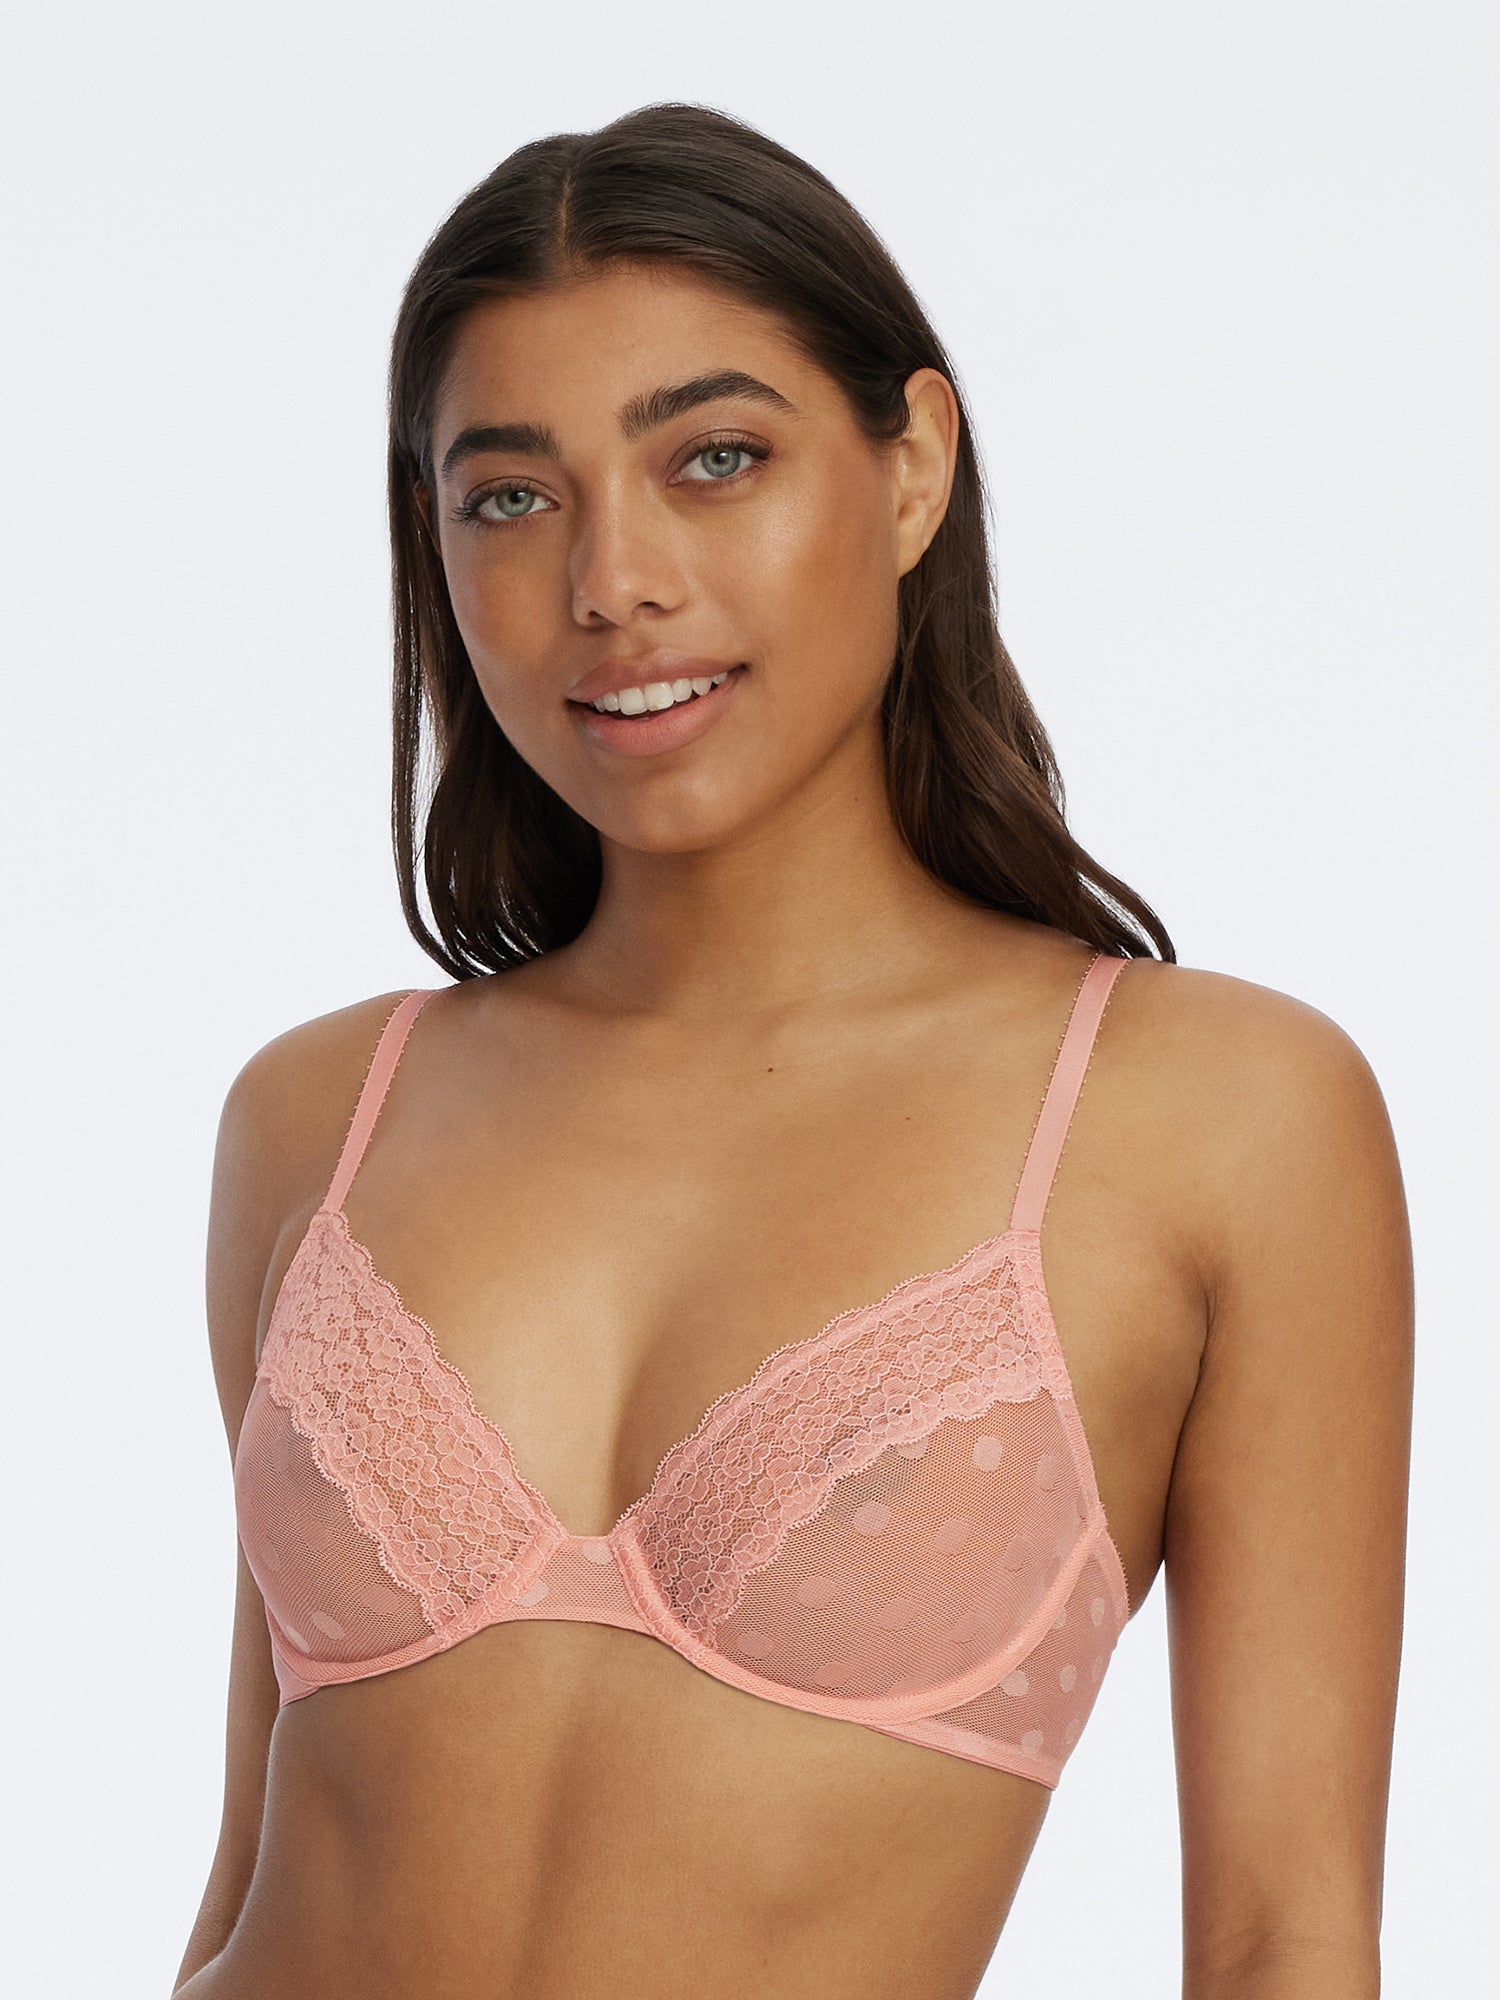 What are the benefits of unlined bras? Why are lined bras more